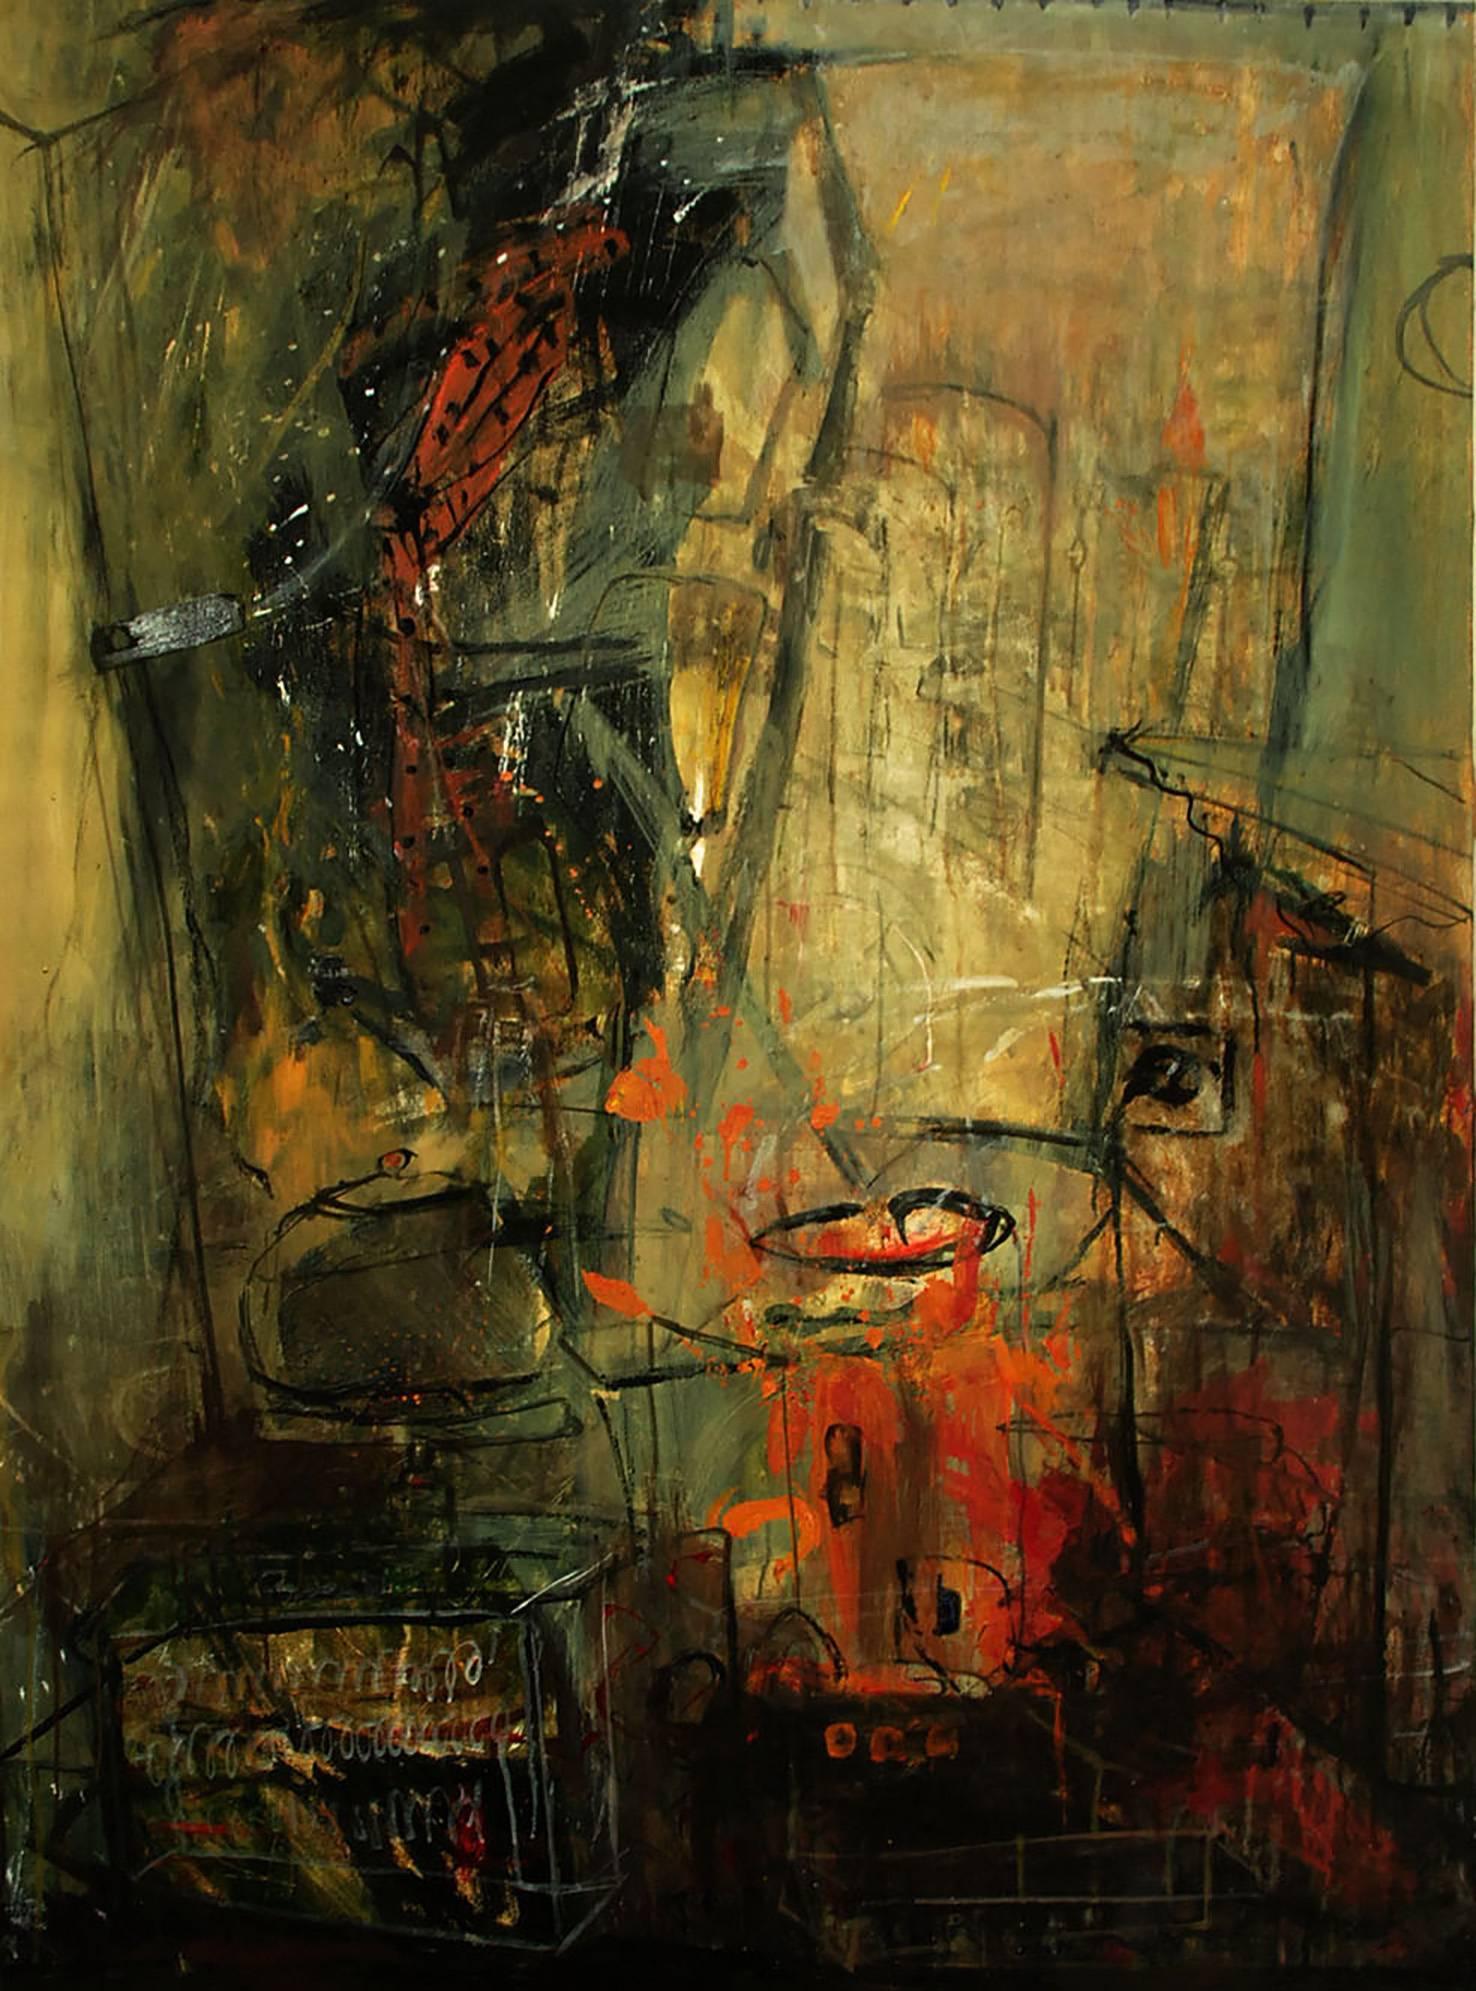 The Burned Theater Series No 6 - Painting by Bahar Ejtemaei